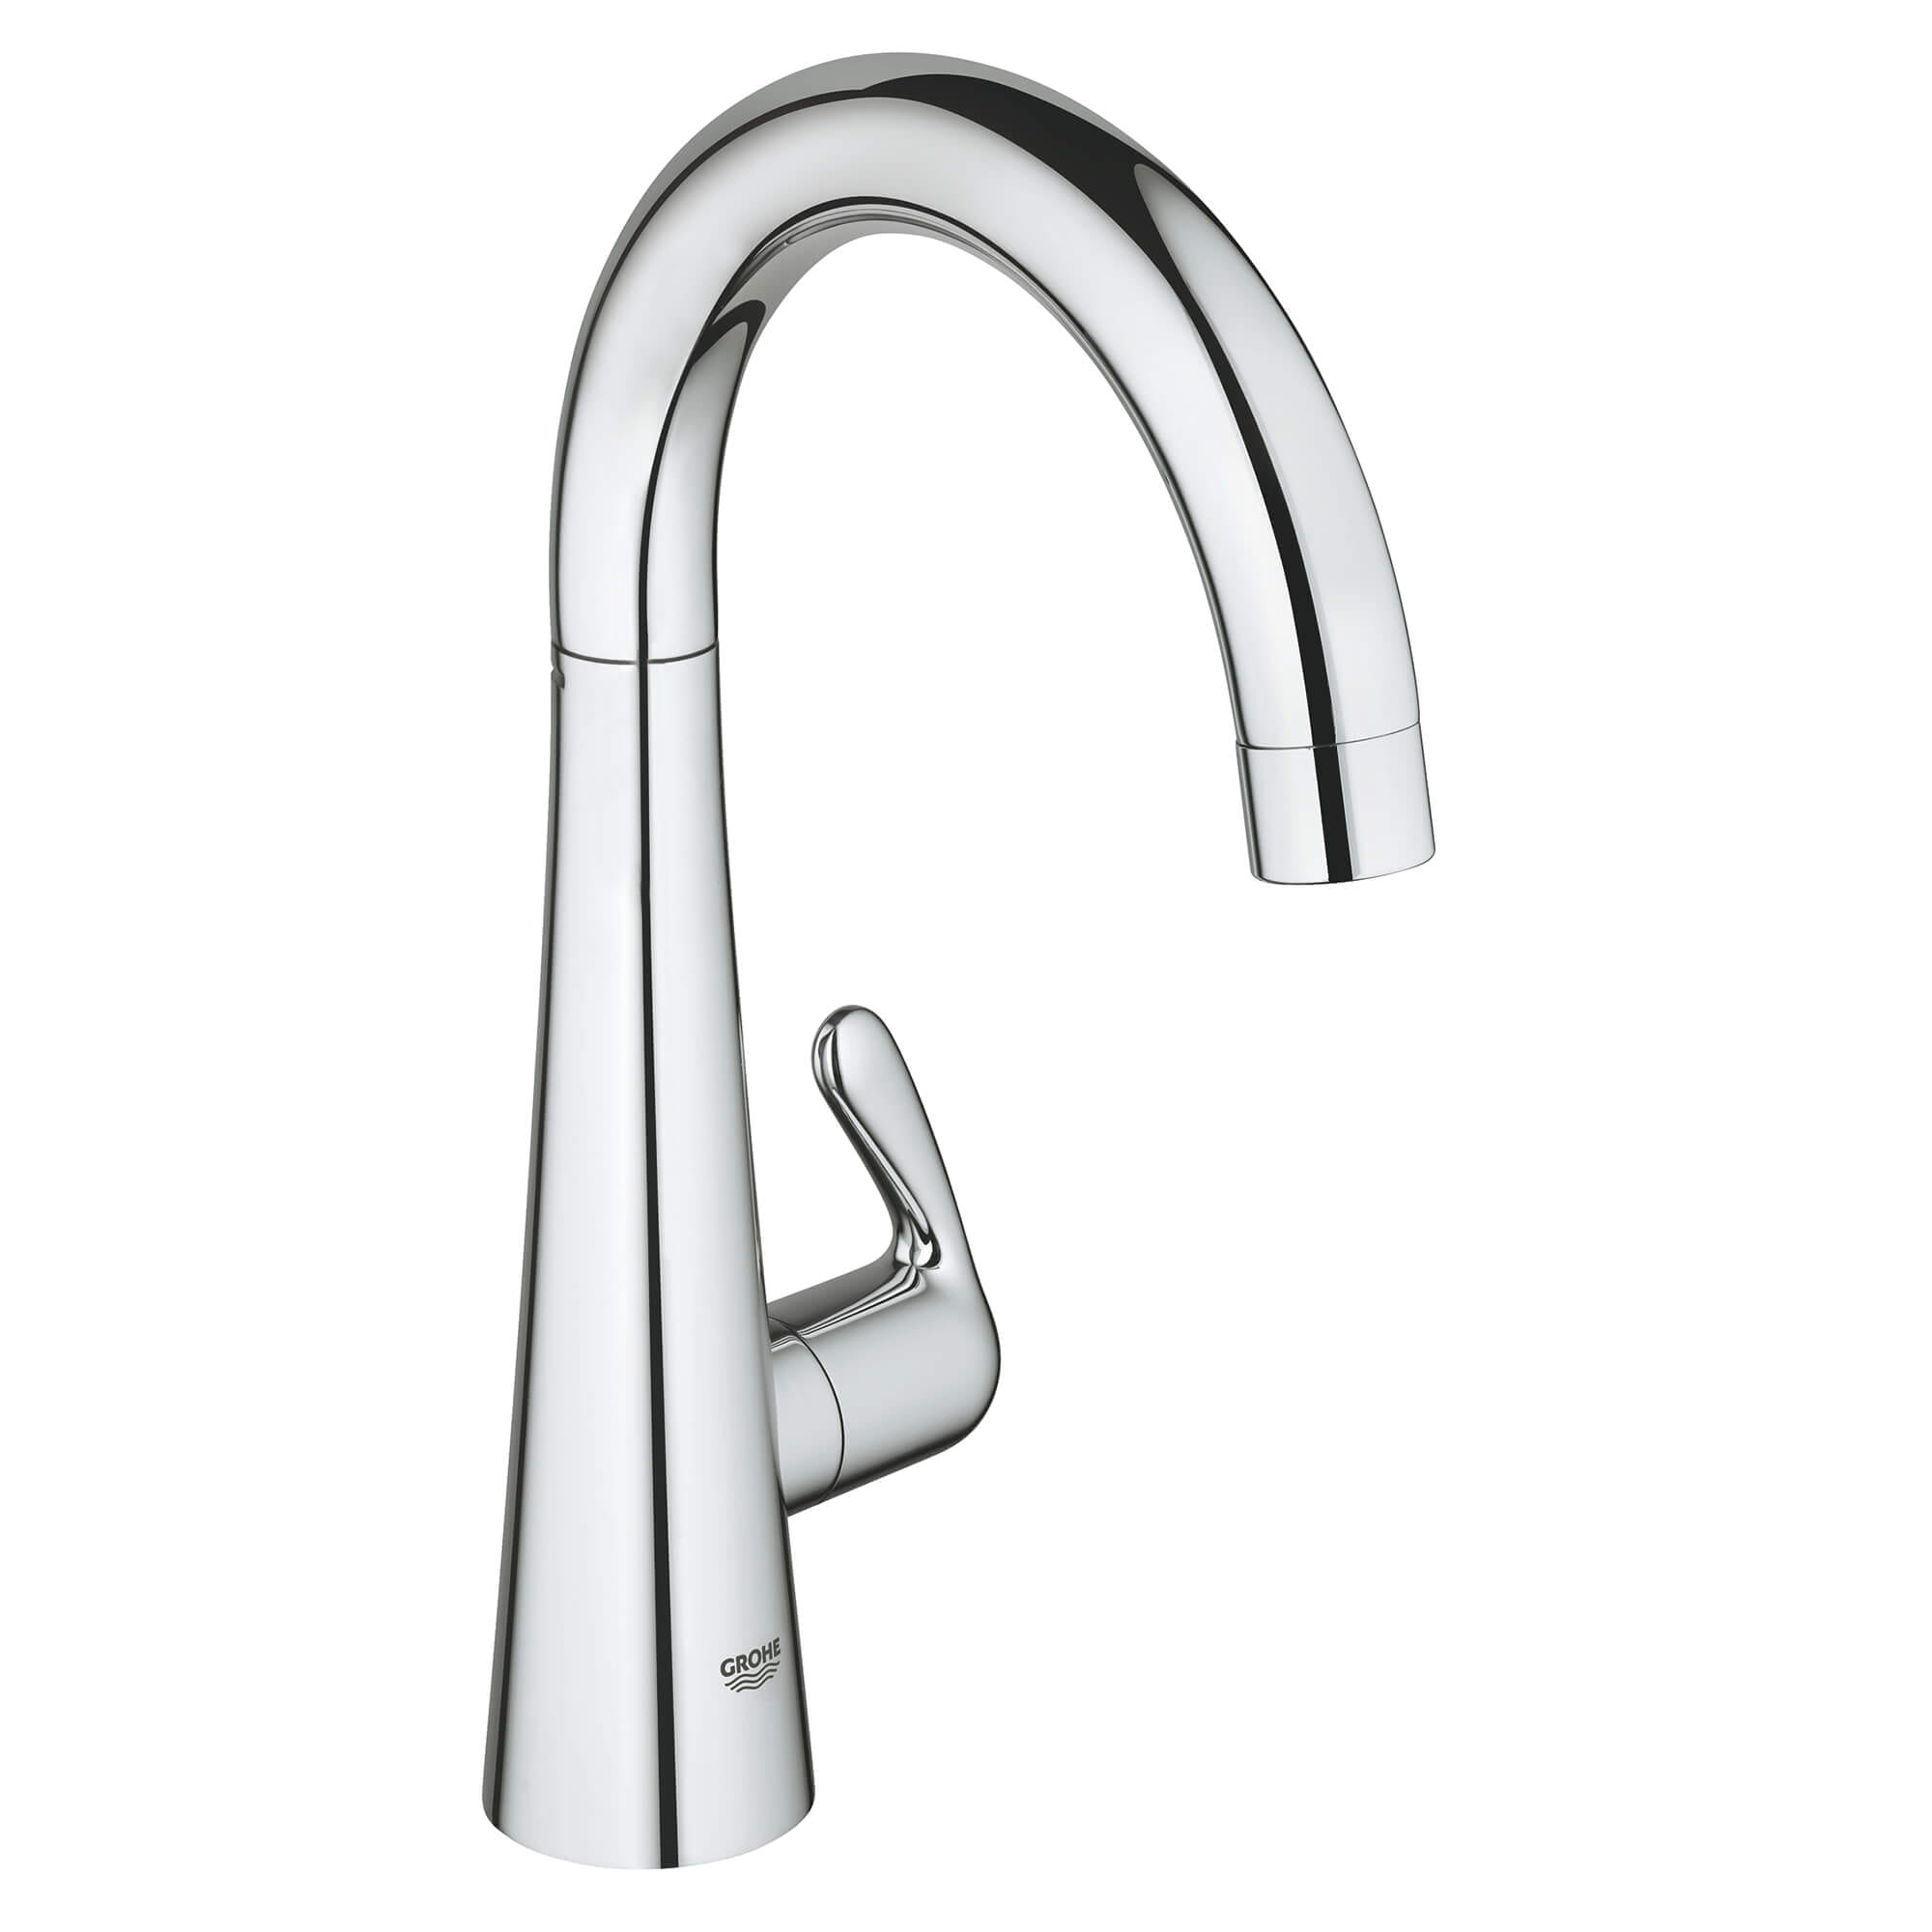 Single Handle Pillar Tap Water Faucet 175 GPM GROHE CHROME